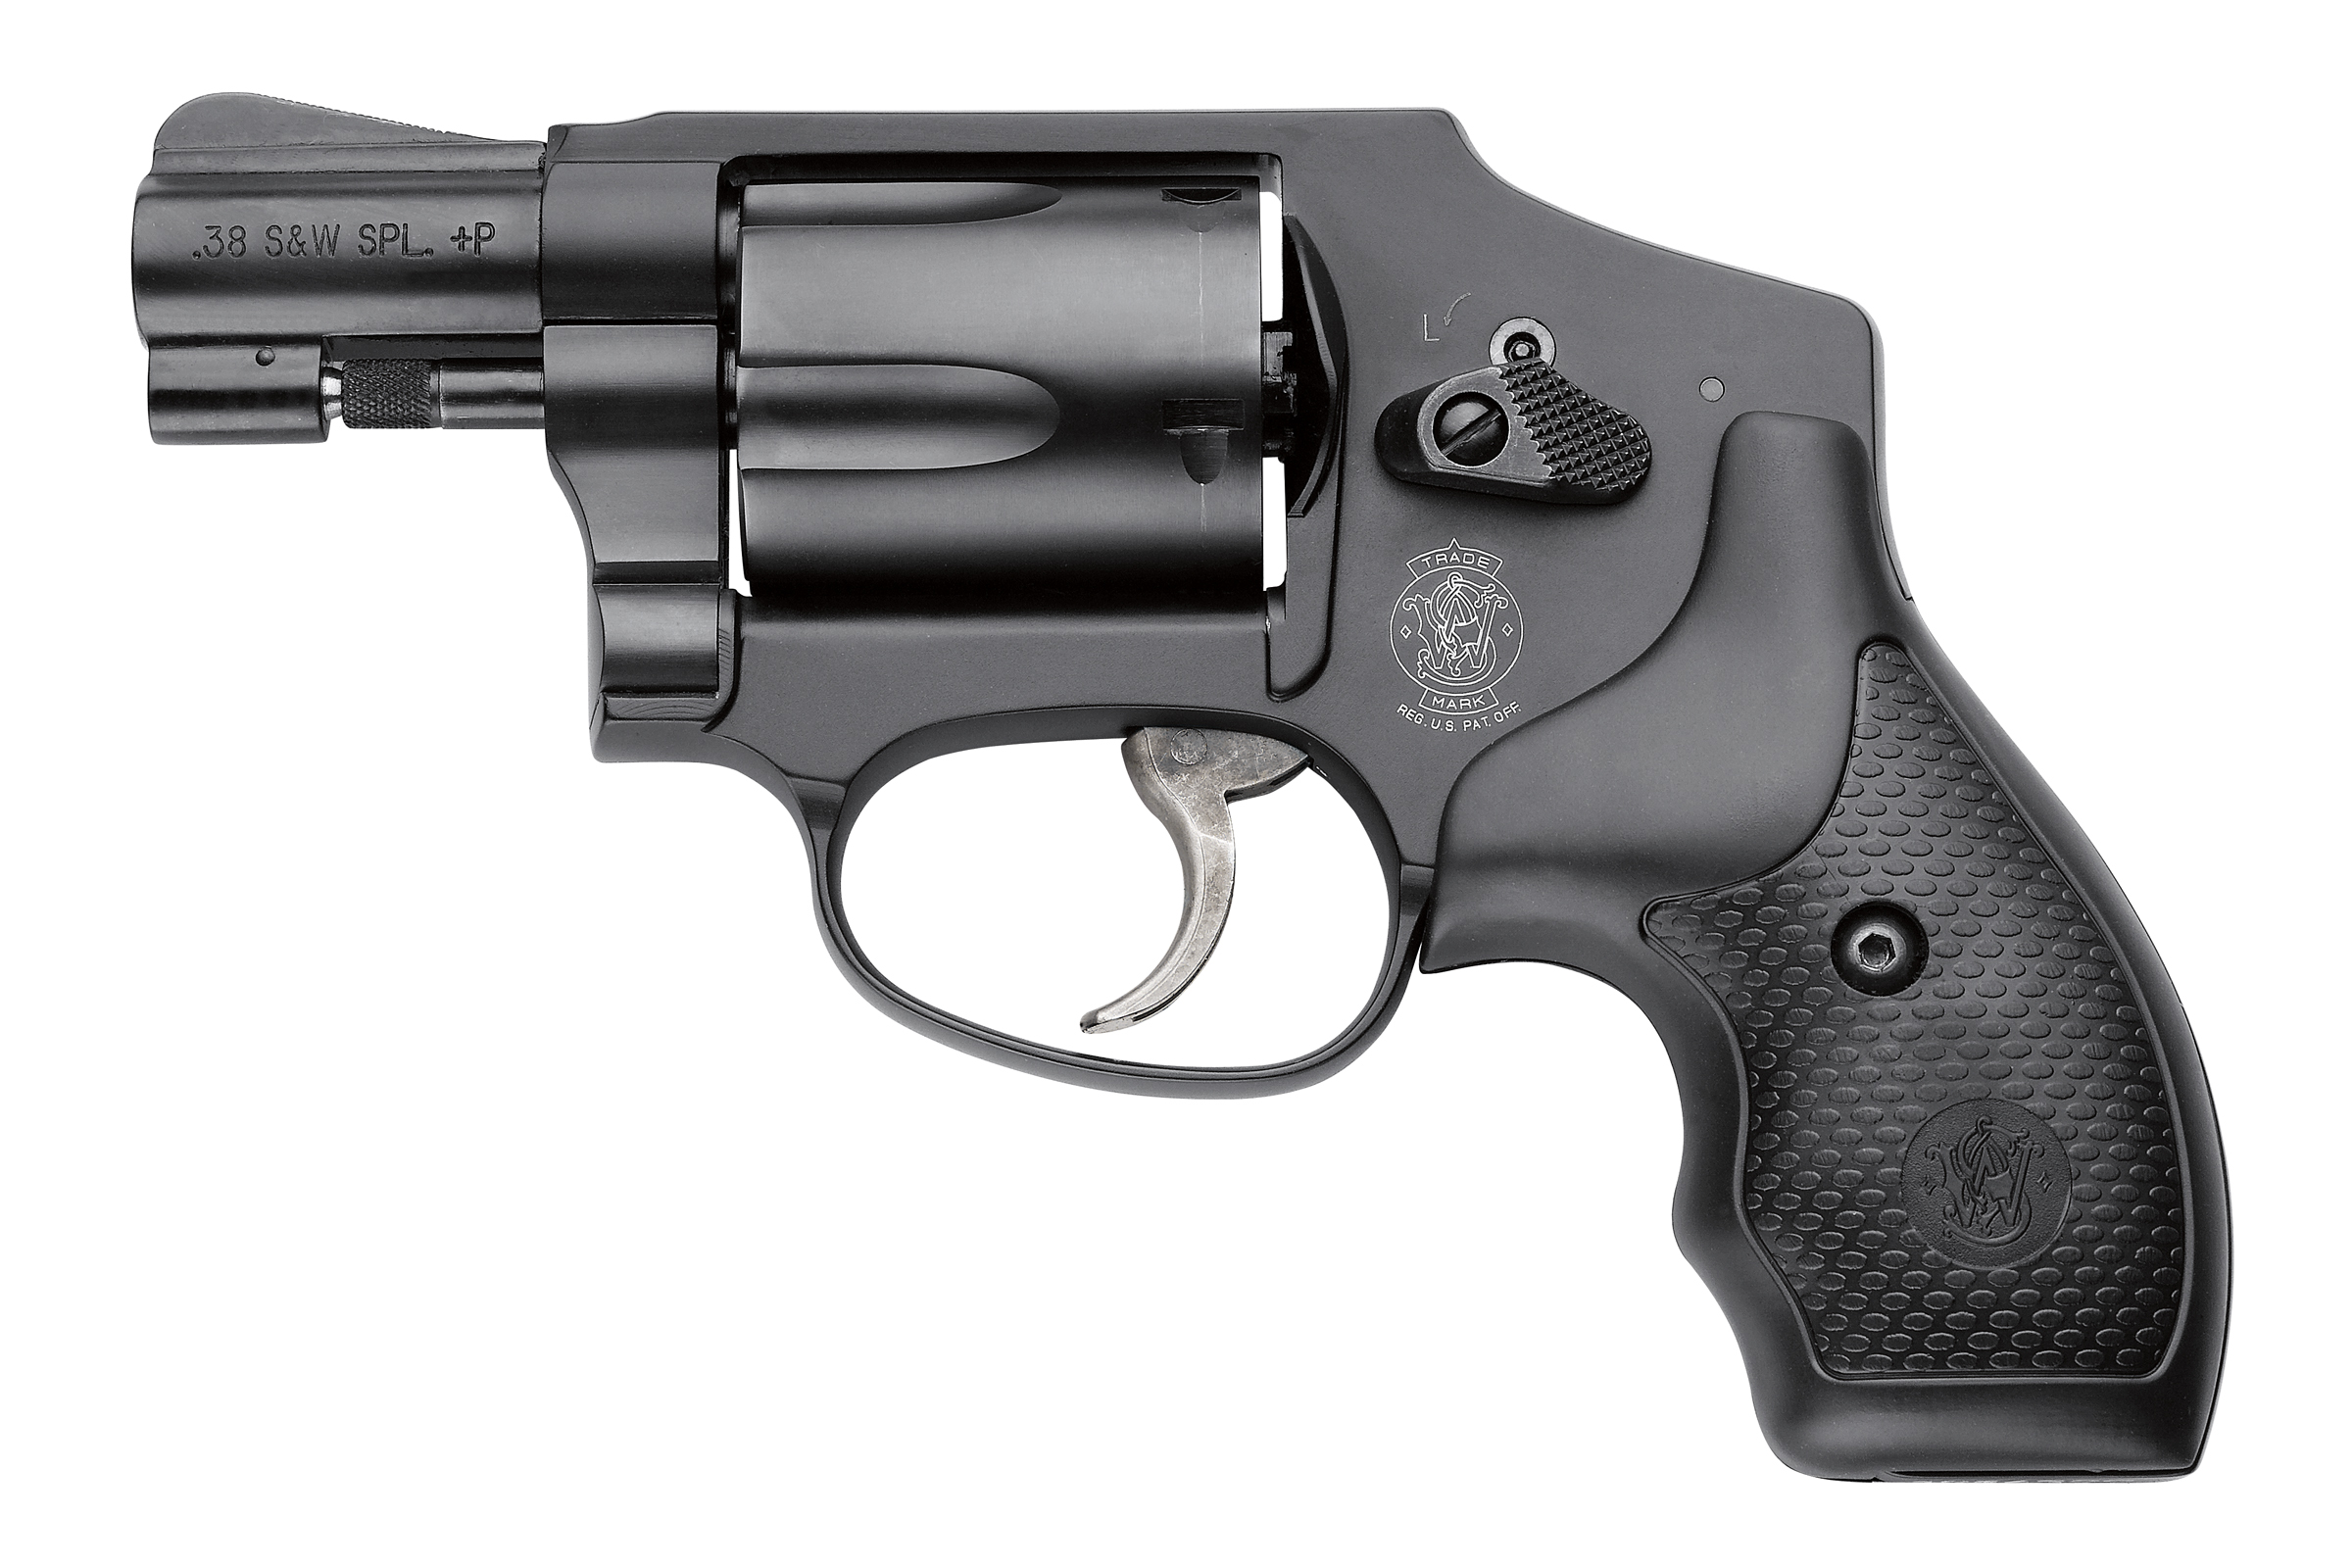 https://cityarsenal.com/product/smith-wesson-442-38-special-revolver-black-airweight/